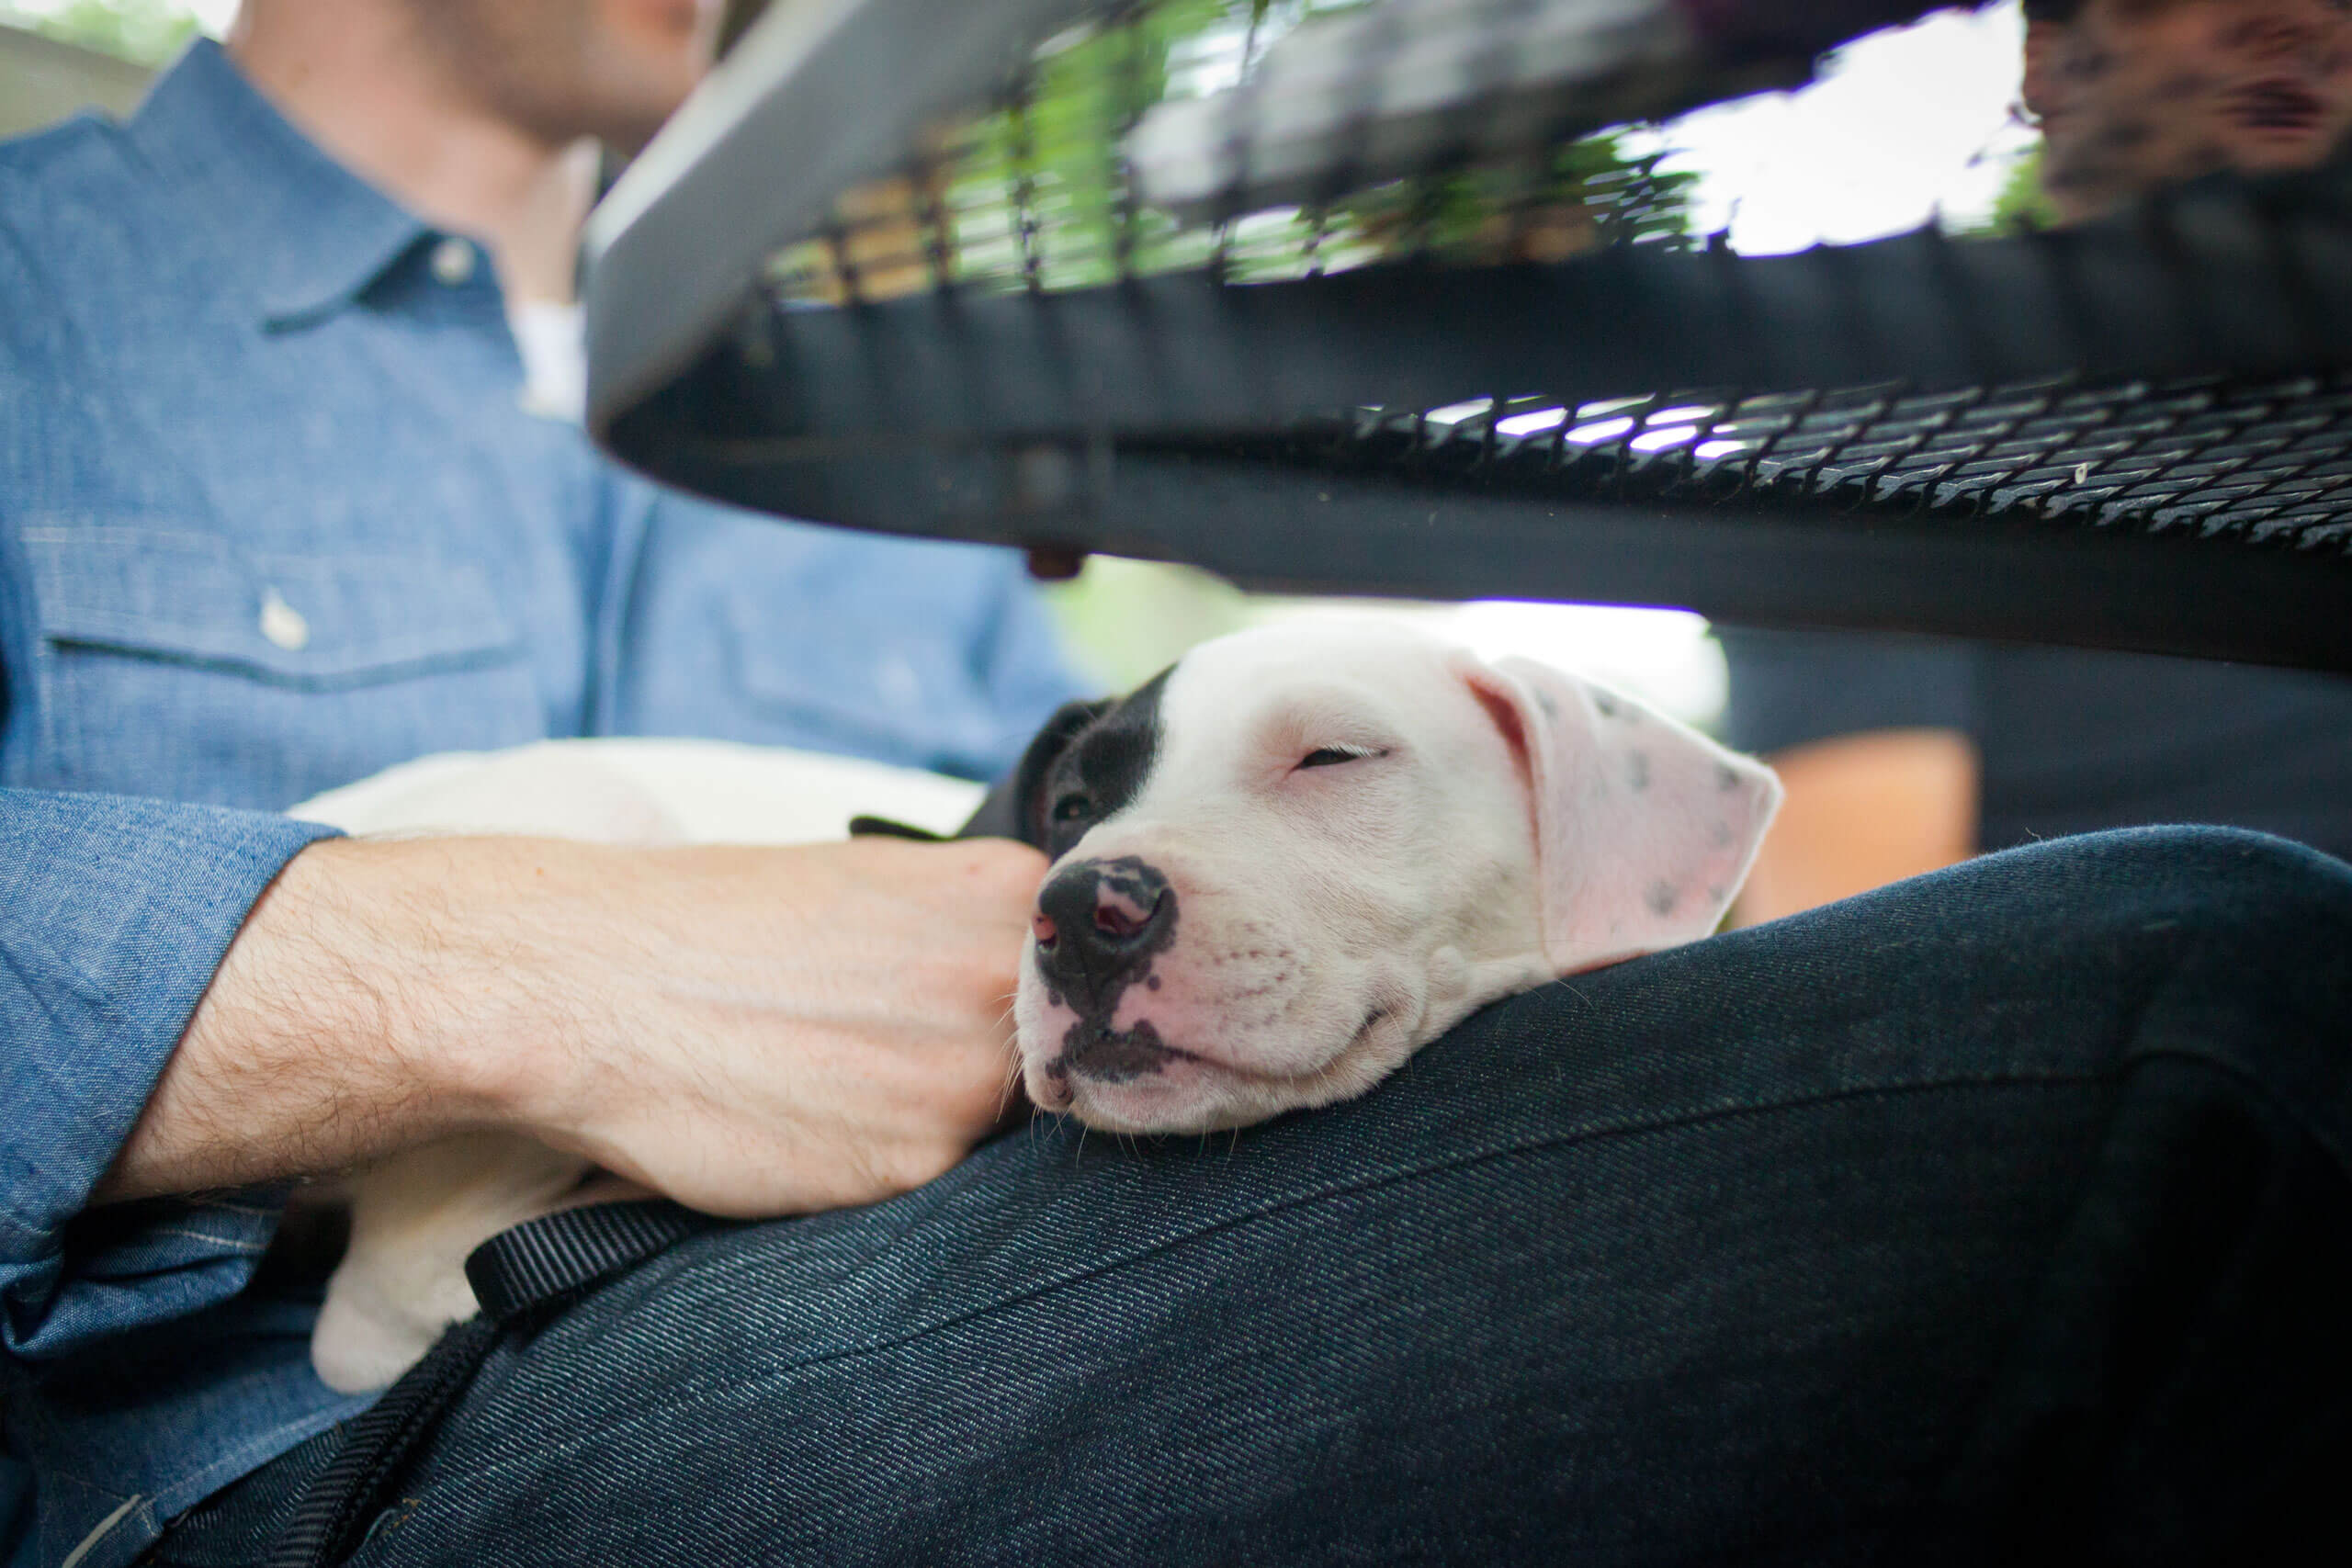 Puppy asleep on a man's lap outside